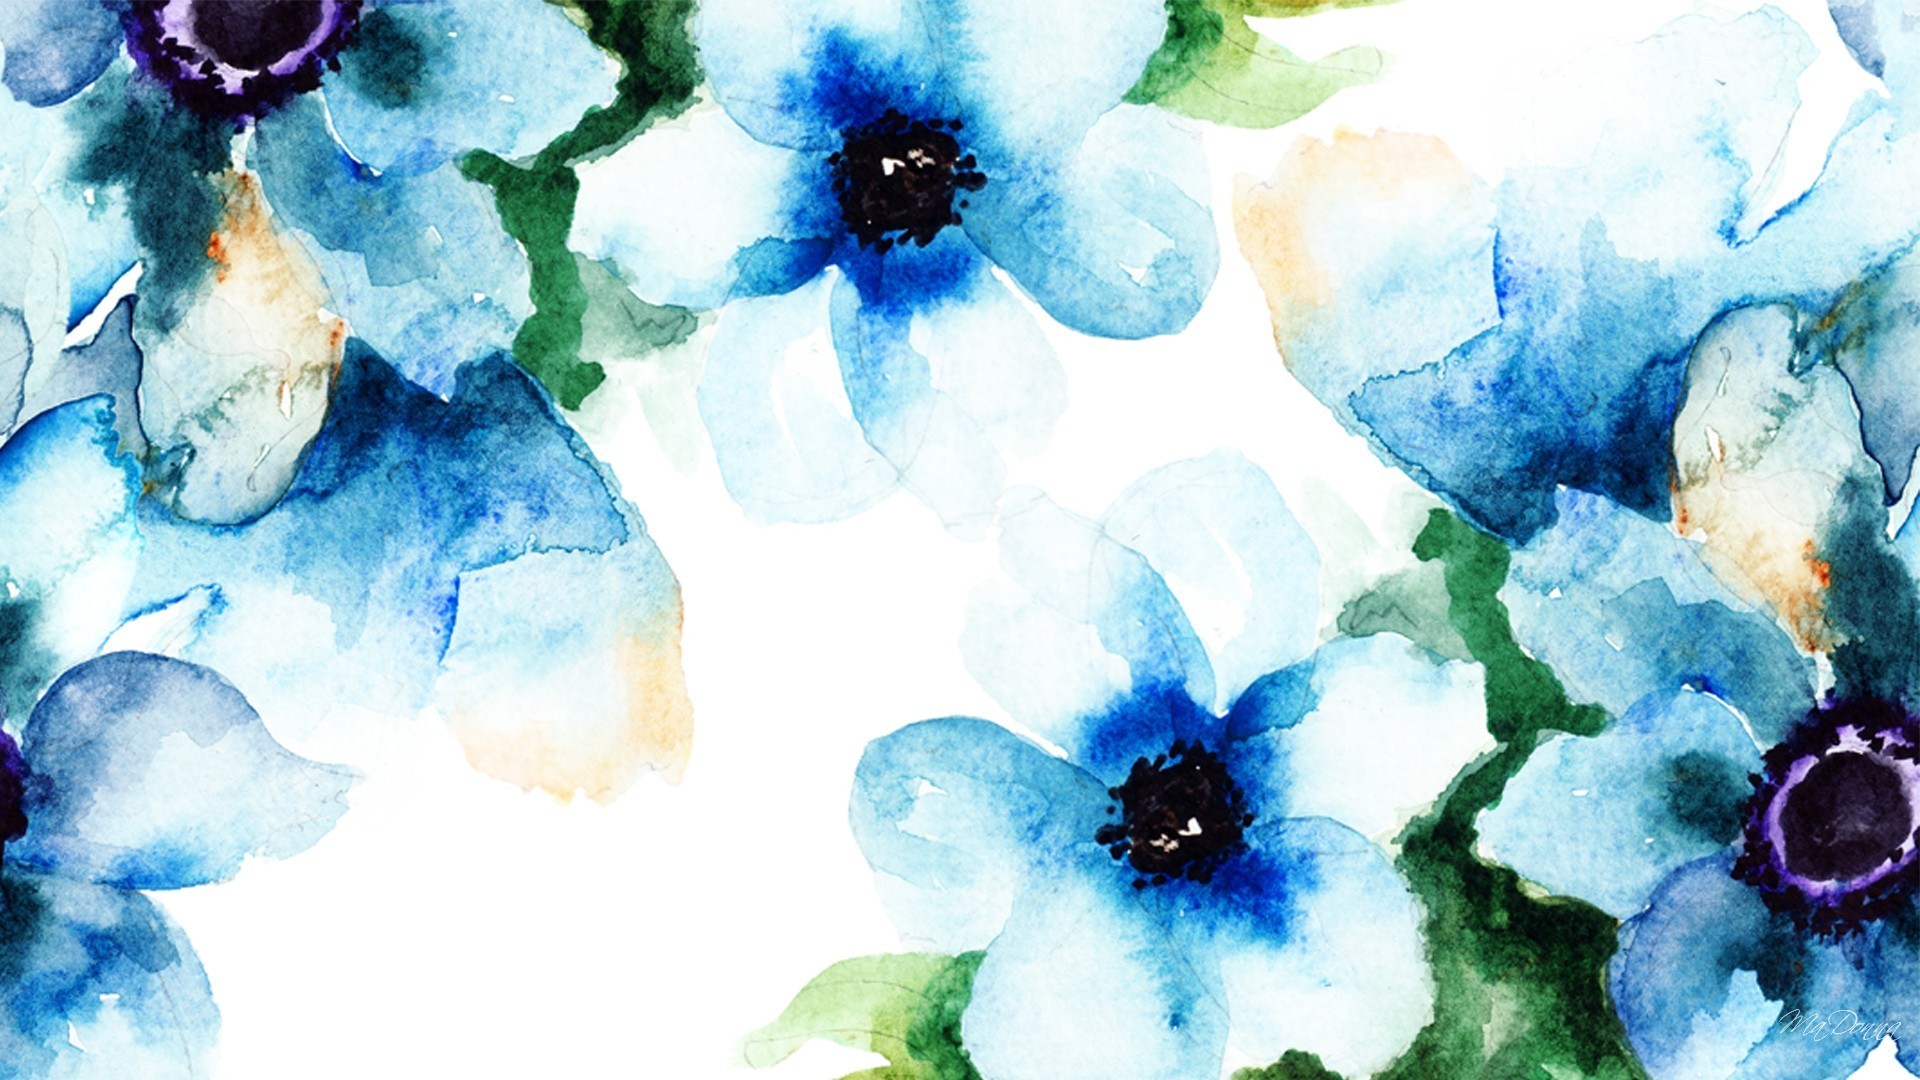 30 Free Beautiful Watercolor Wallpapers That Should Be on Your Desktop – 30 Wallpapers Pinterest Watercolor wallpaper, Wallpaper and Watercolor